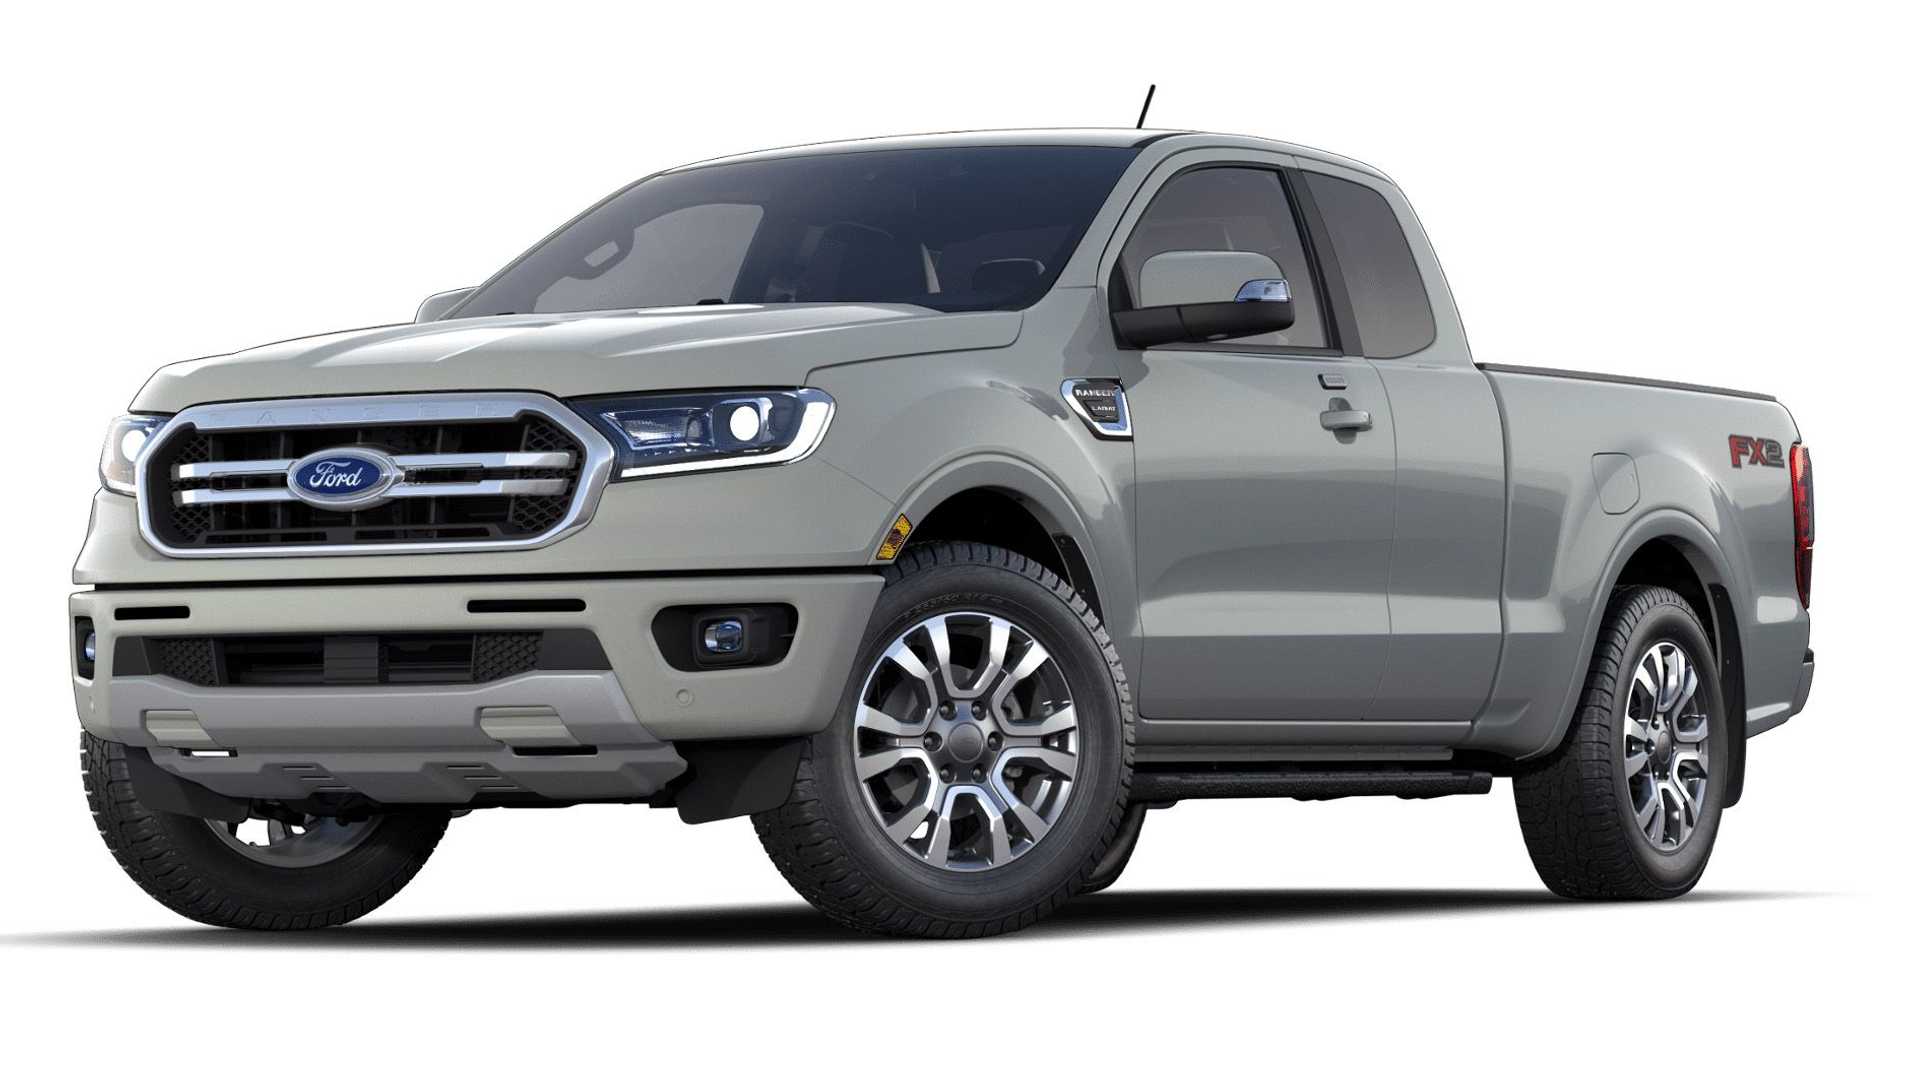 Ford Ranger Gets Popular Cactus Gray Color From Bronco